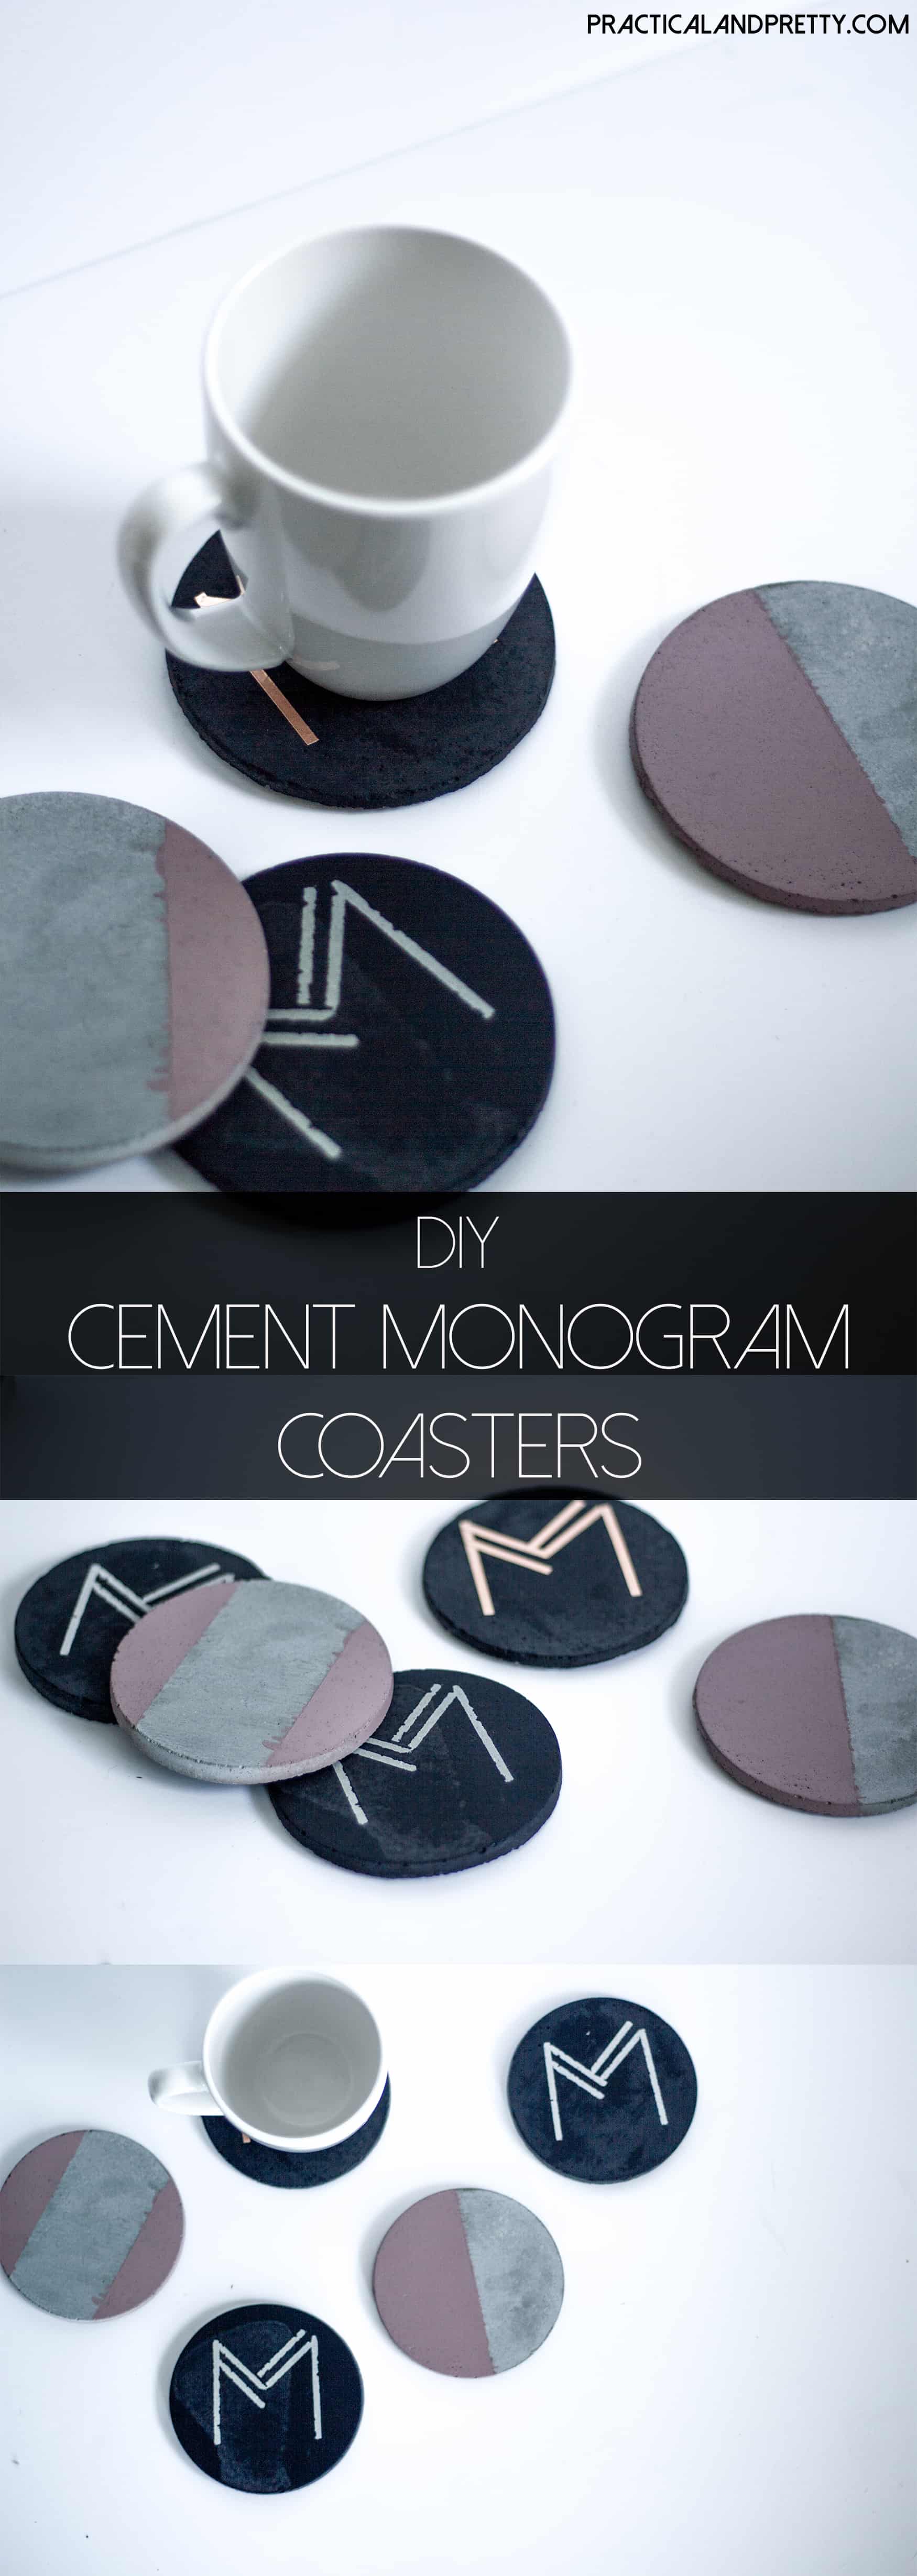 DIY cement coasters and instructions. Monogrammed with Art Deco font! Every house needs a set of these.